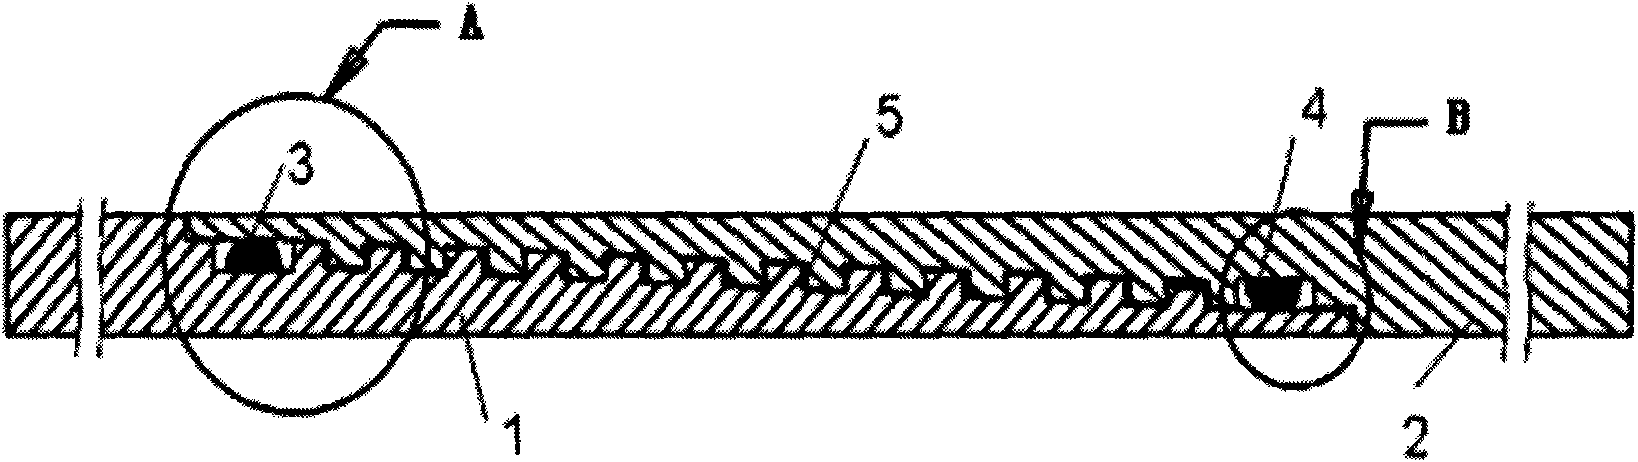 Expansion sleeve joint with double hook shaped thread connection